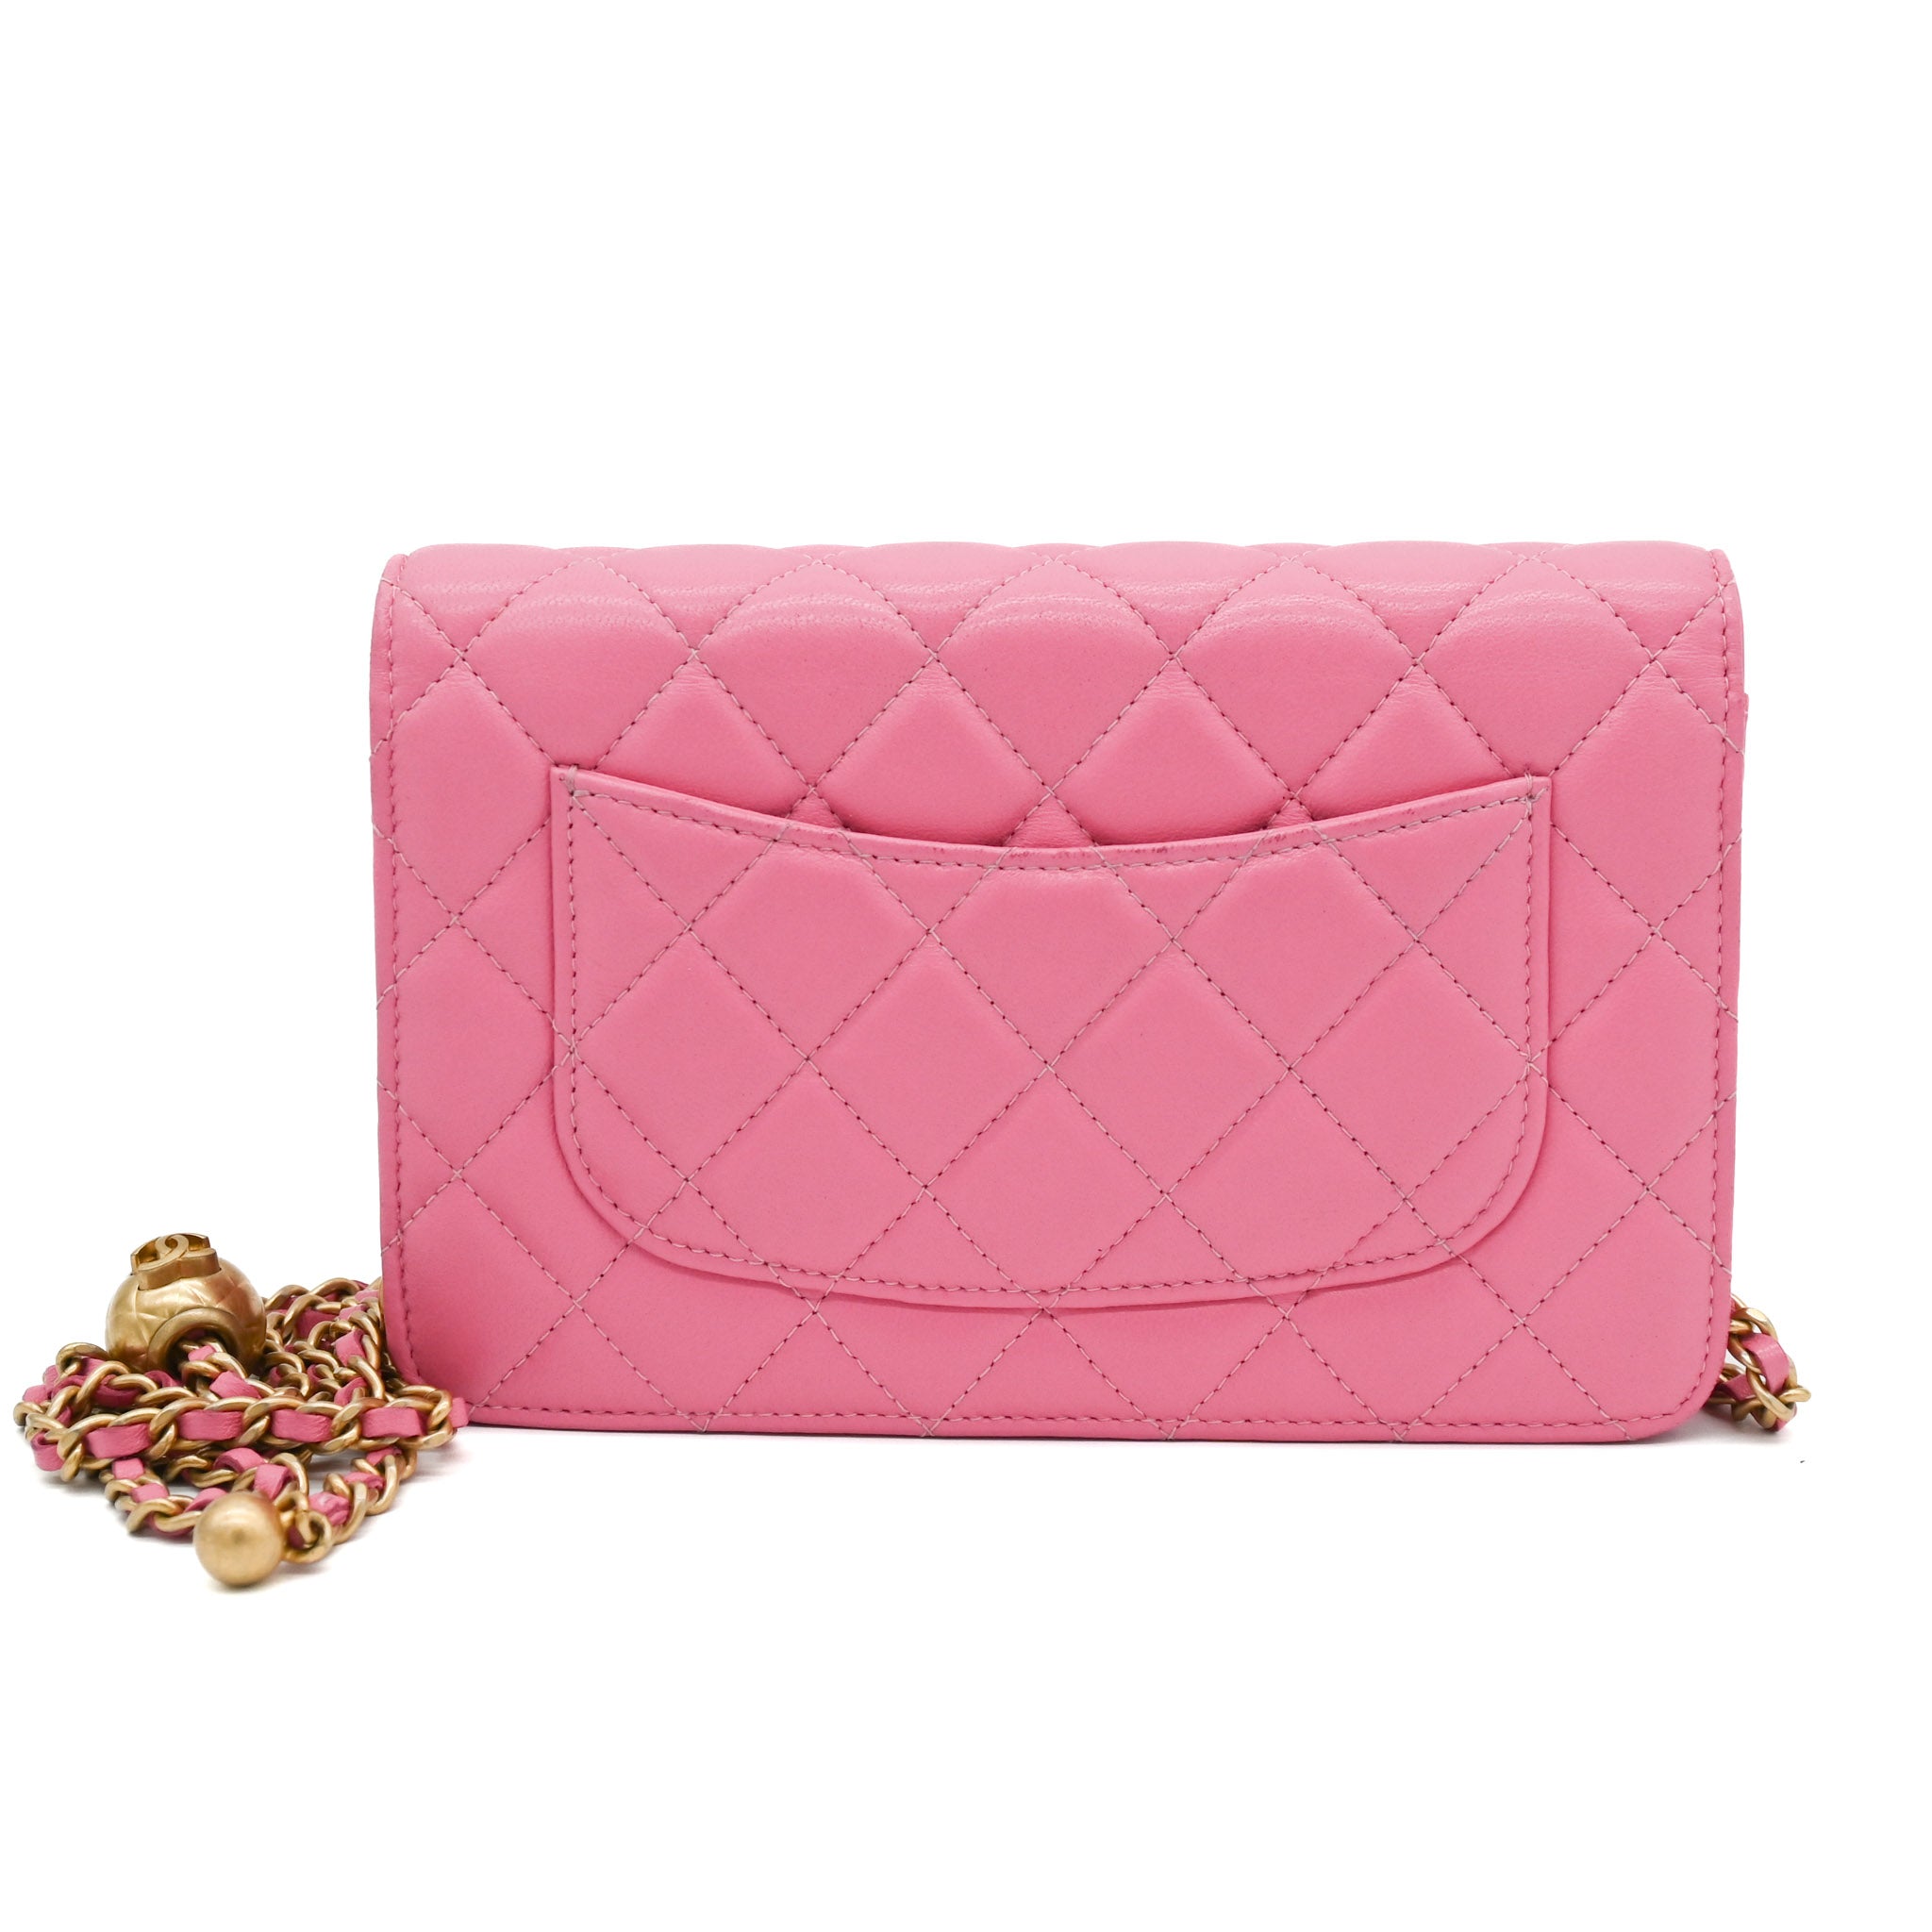 Chanel Pink Pearl Crush Lambskin Crush Wallet on Chain with Gold Hardware